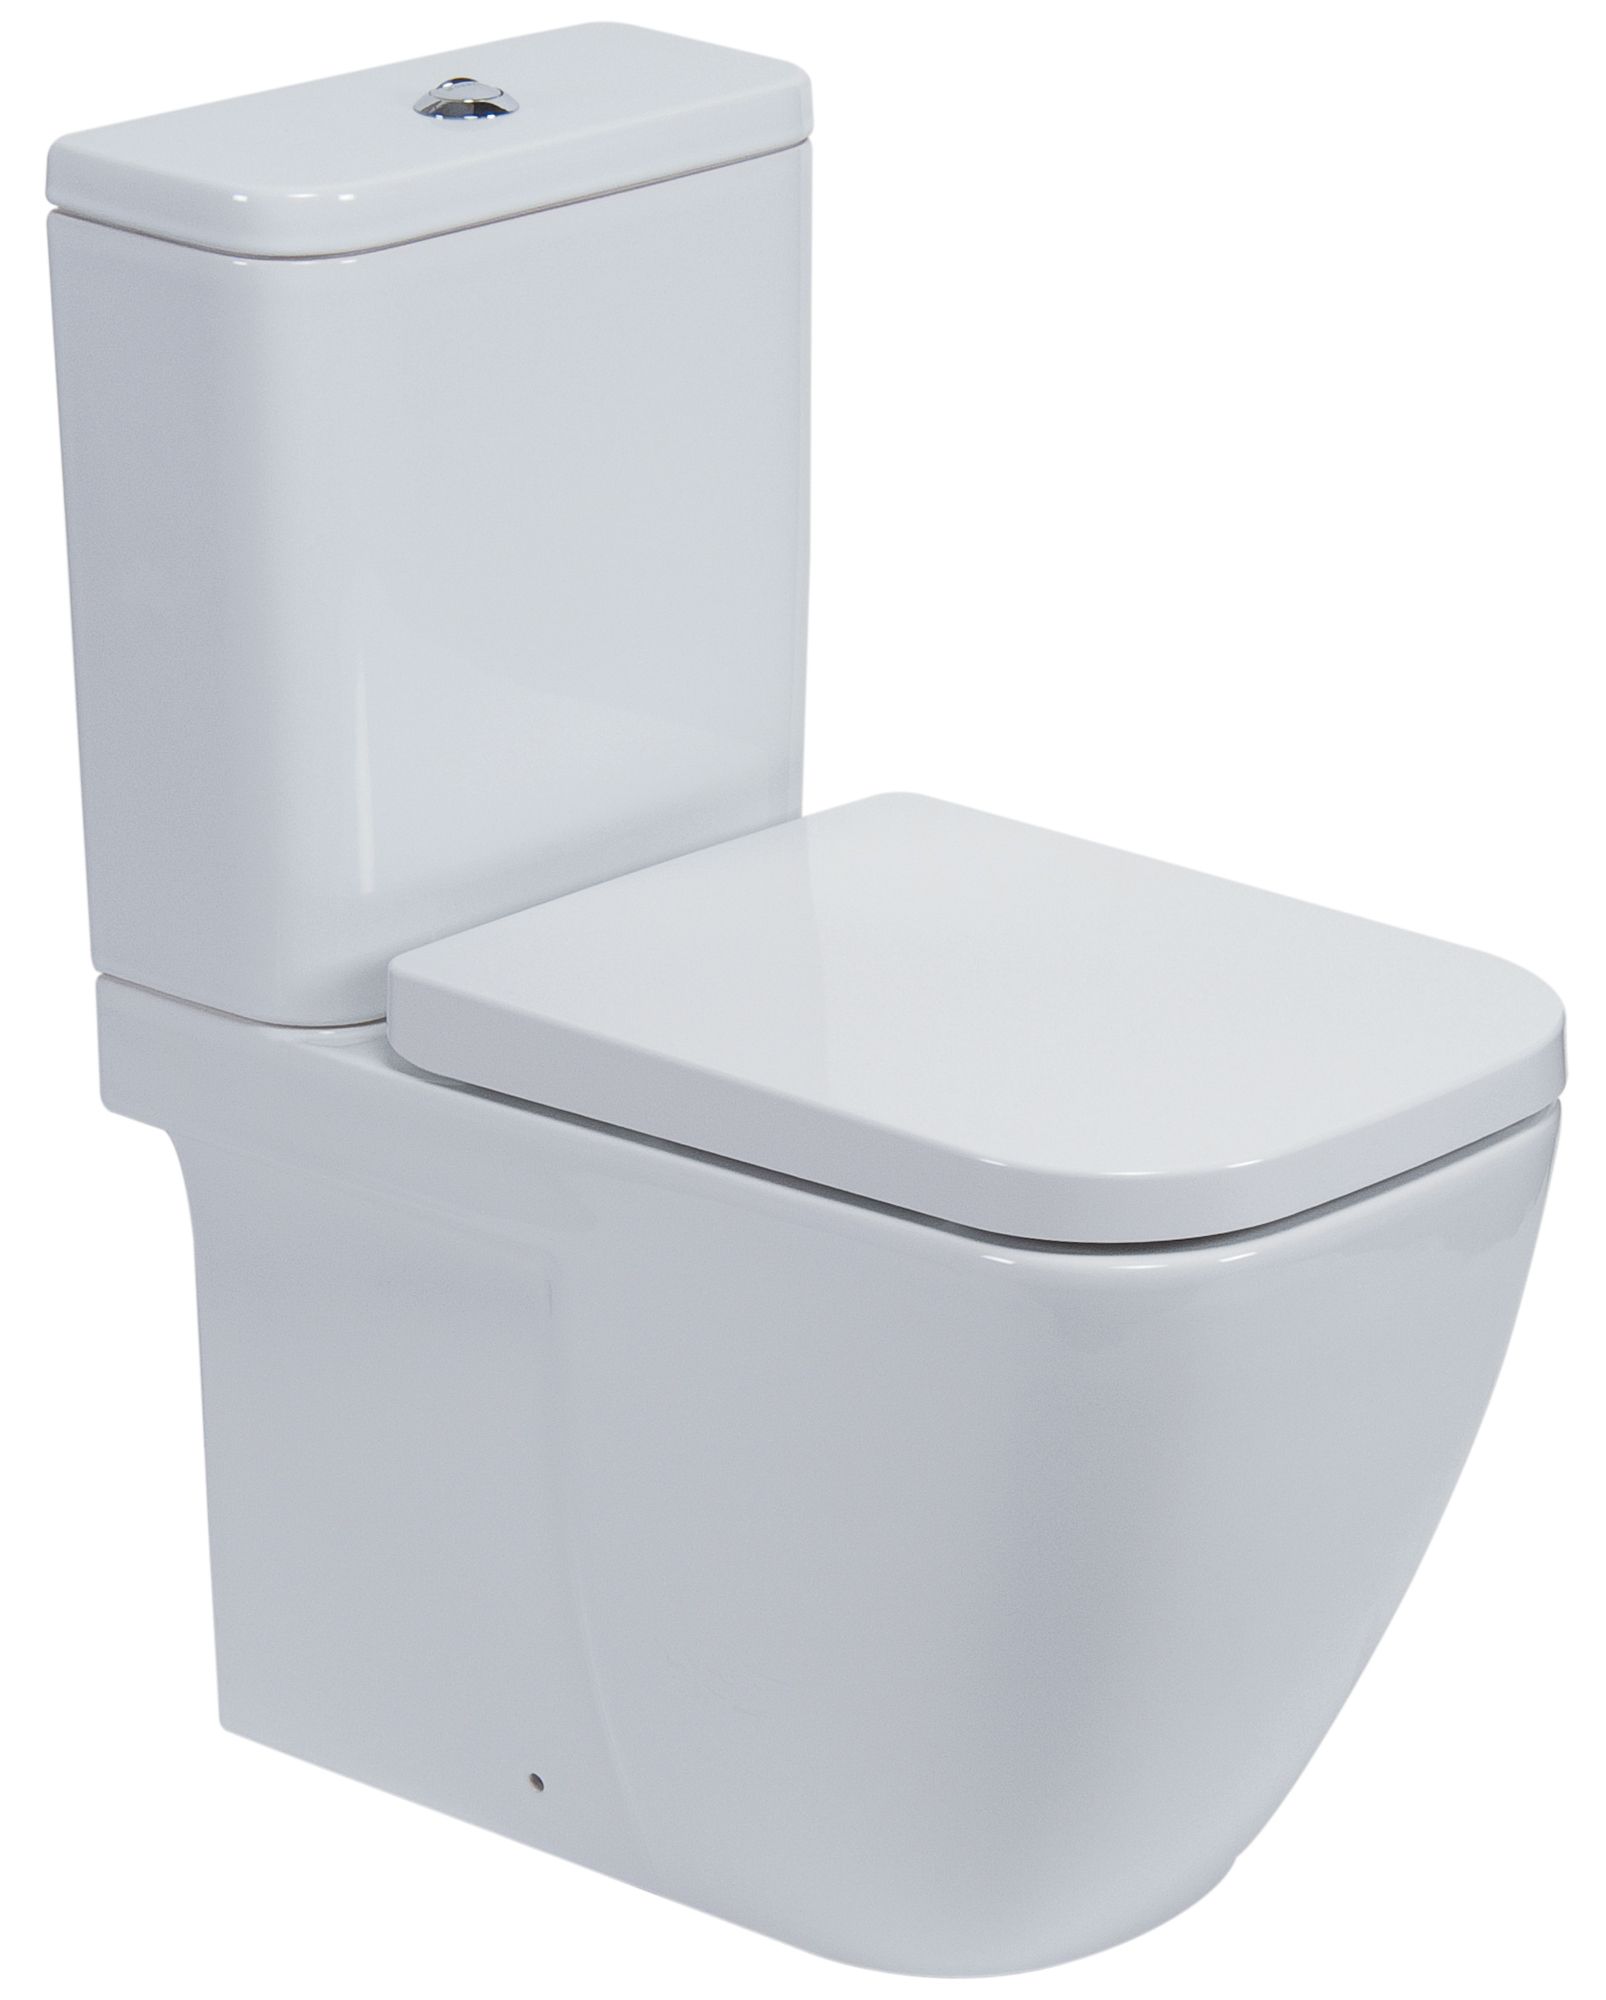 Cooke & Lewis Clancy Modern Close-Coupled Toilet with Soft Close Seat